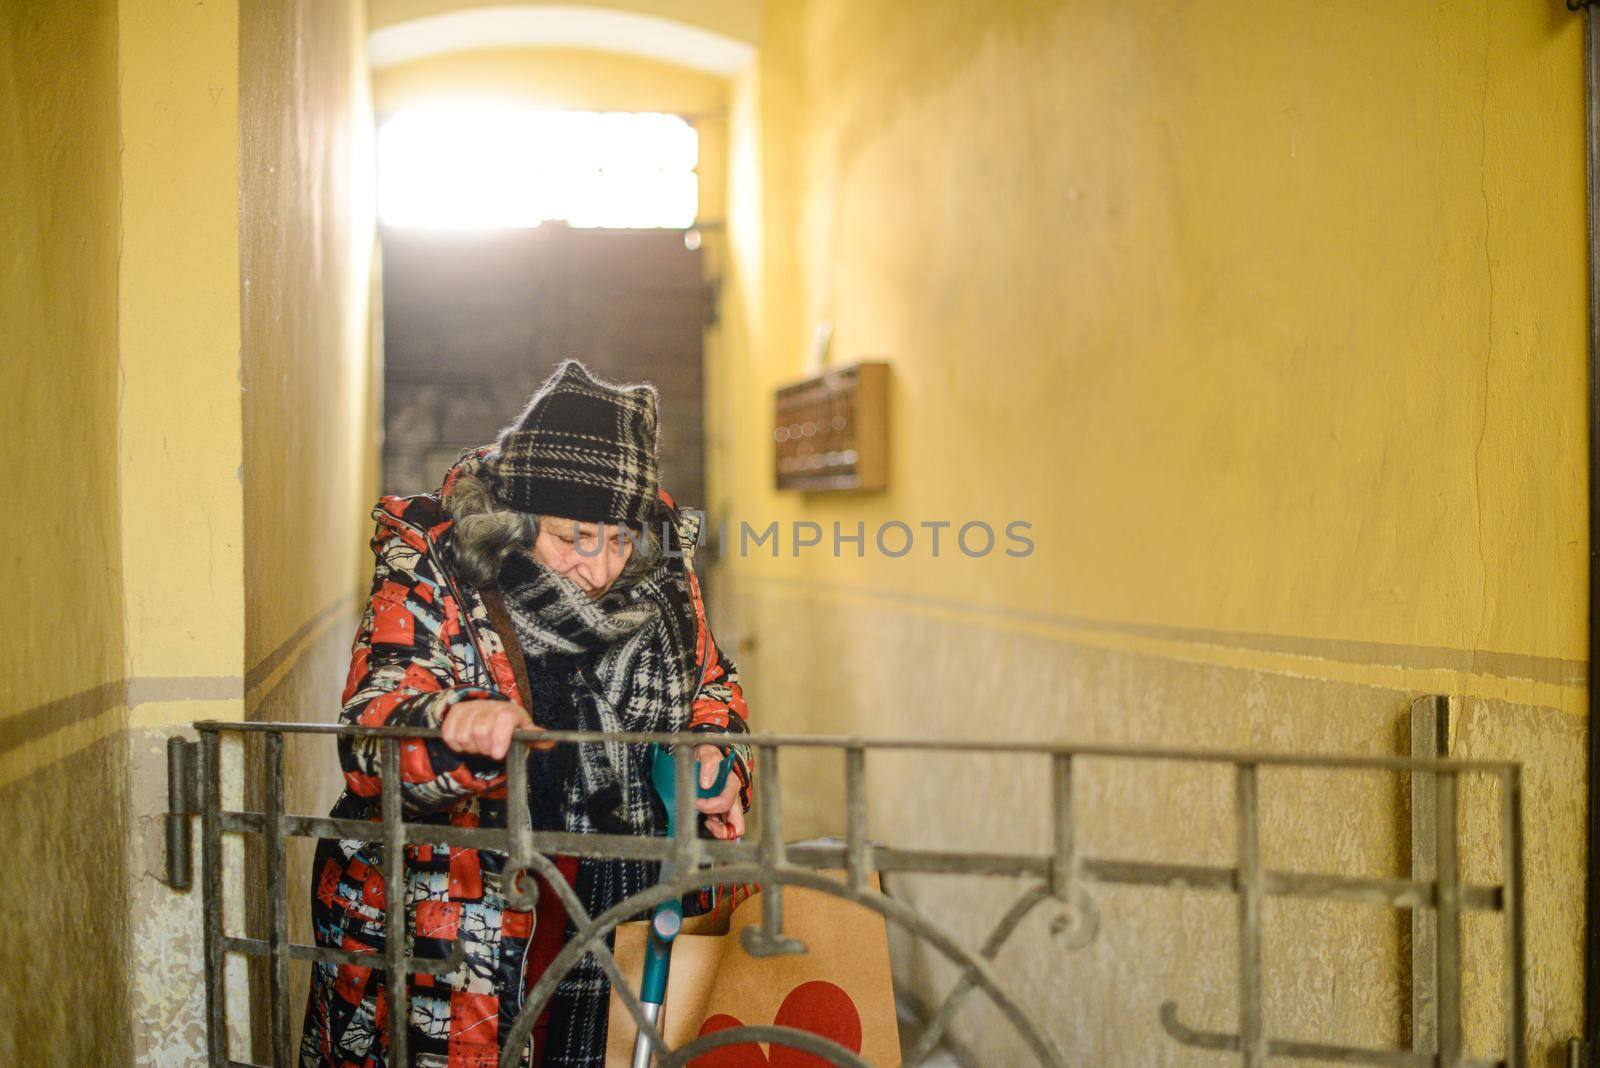 senior east european disabled woman entering a building with an architectural barrier opening a gate with one hand and holdding the crutch with the other also grabbing a bag dressed warm and shabby. High quality photo